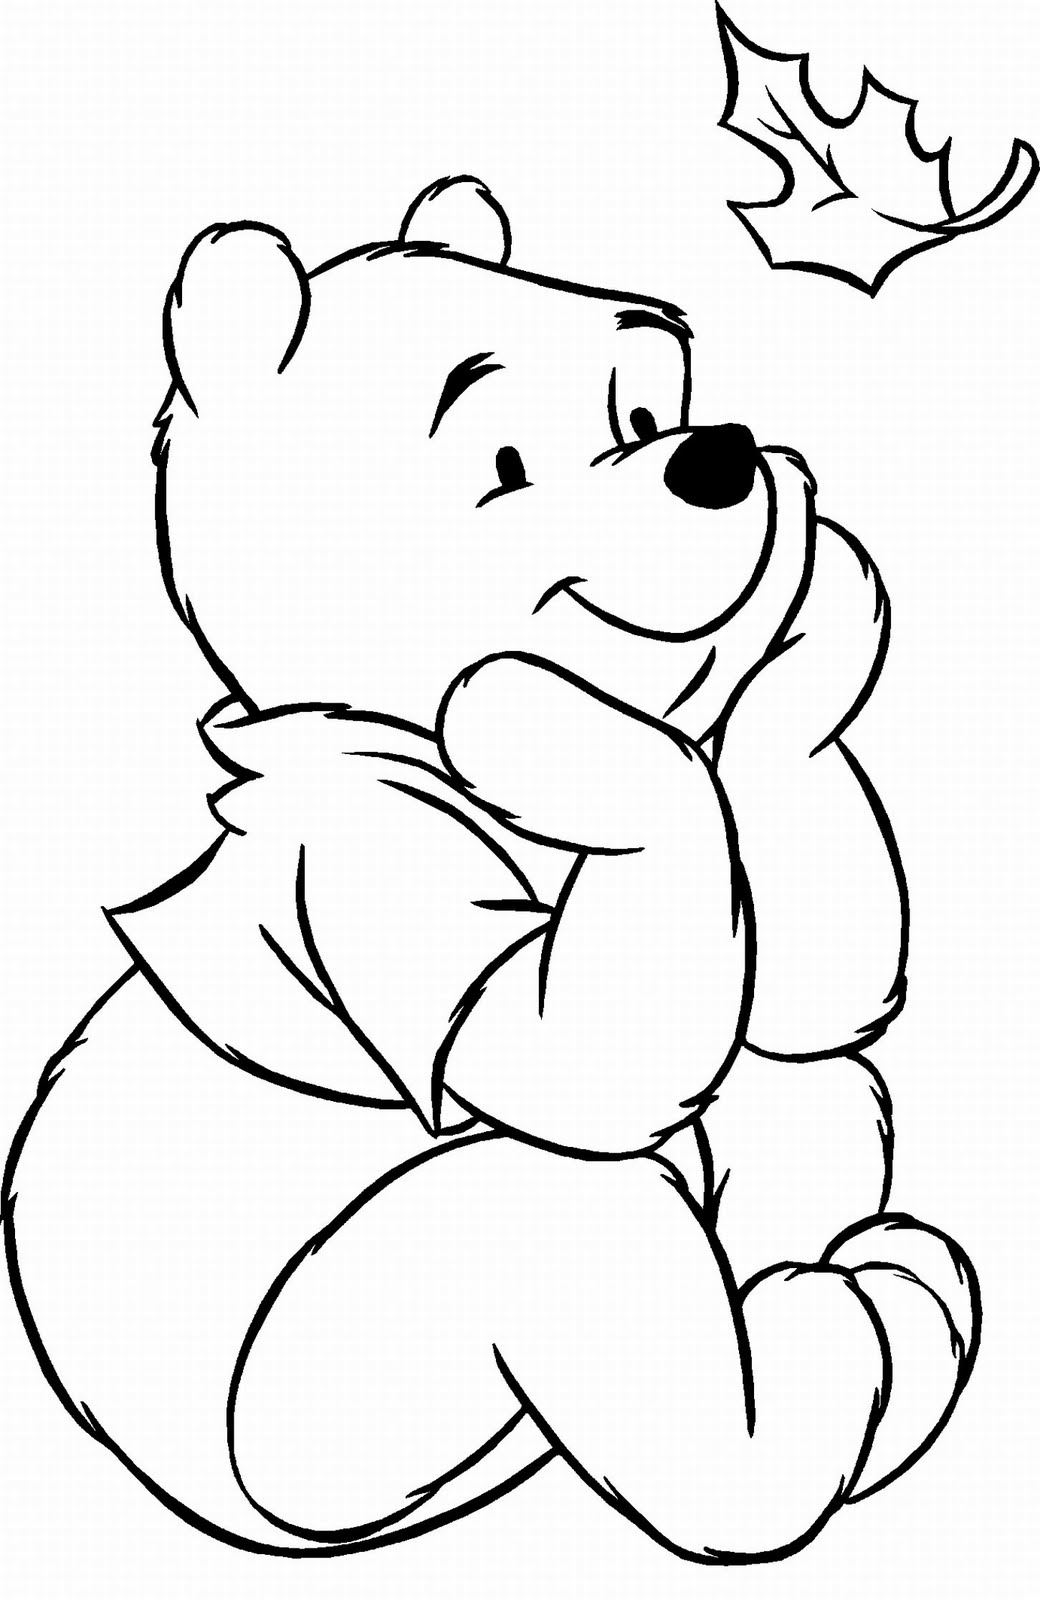  Winnie FREE Disney coloring pages